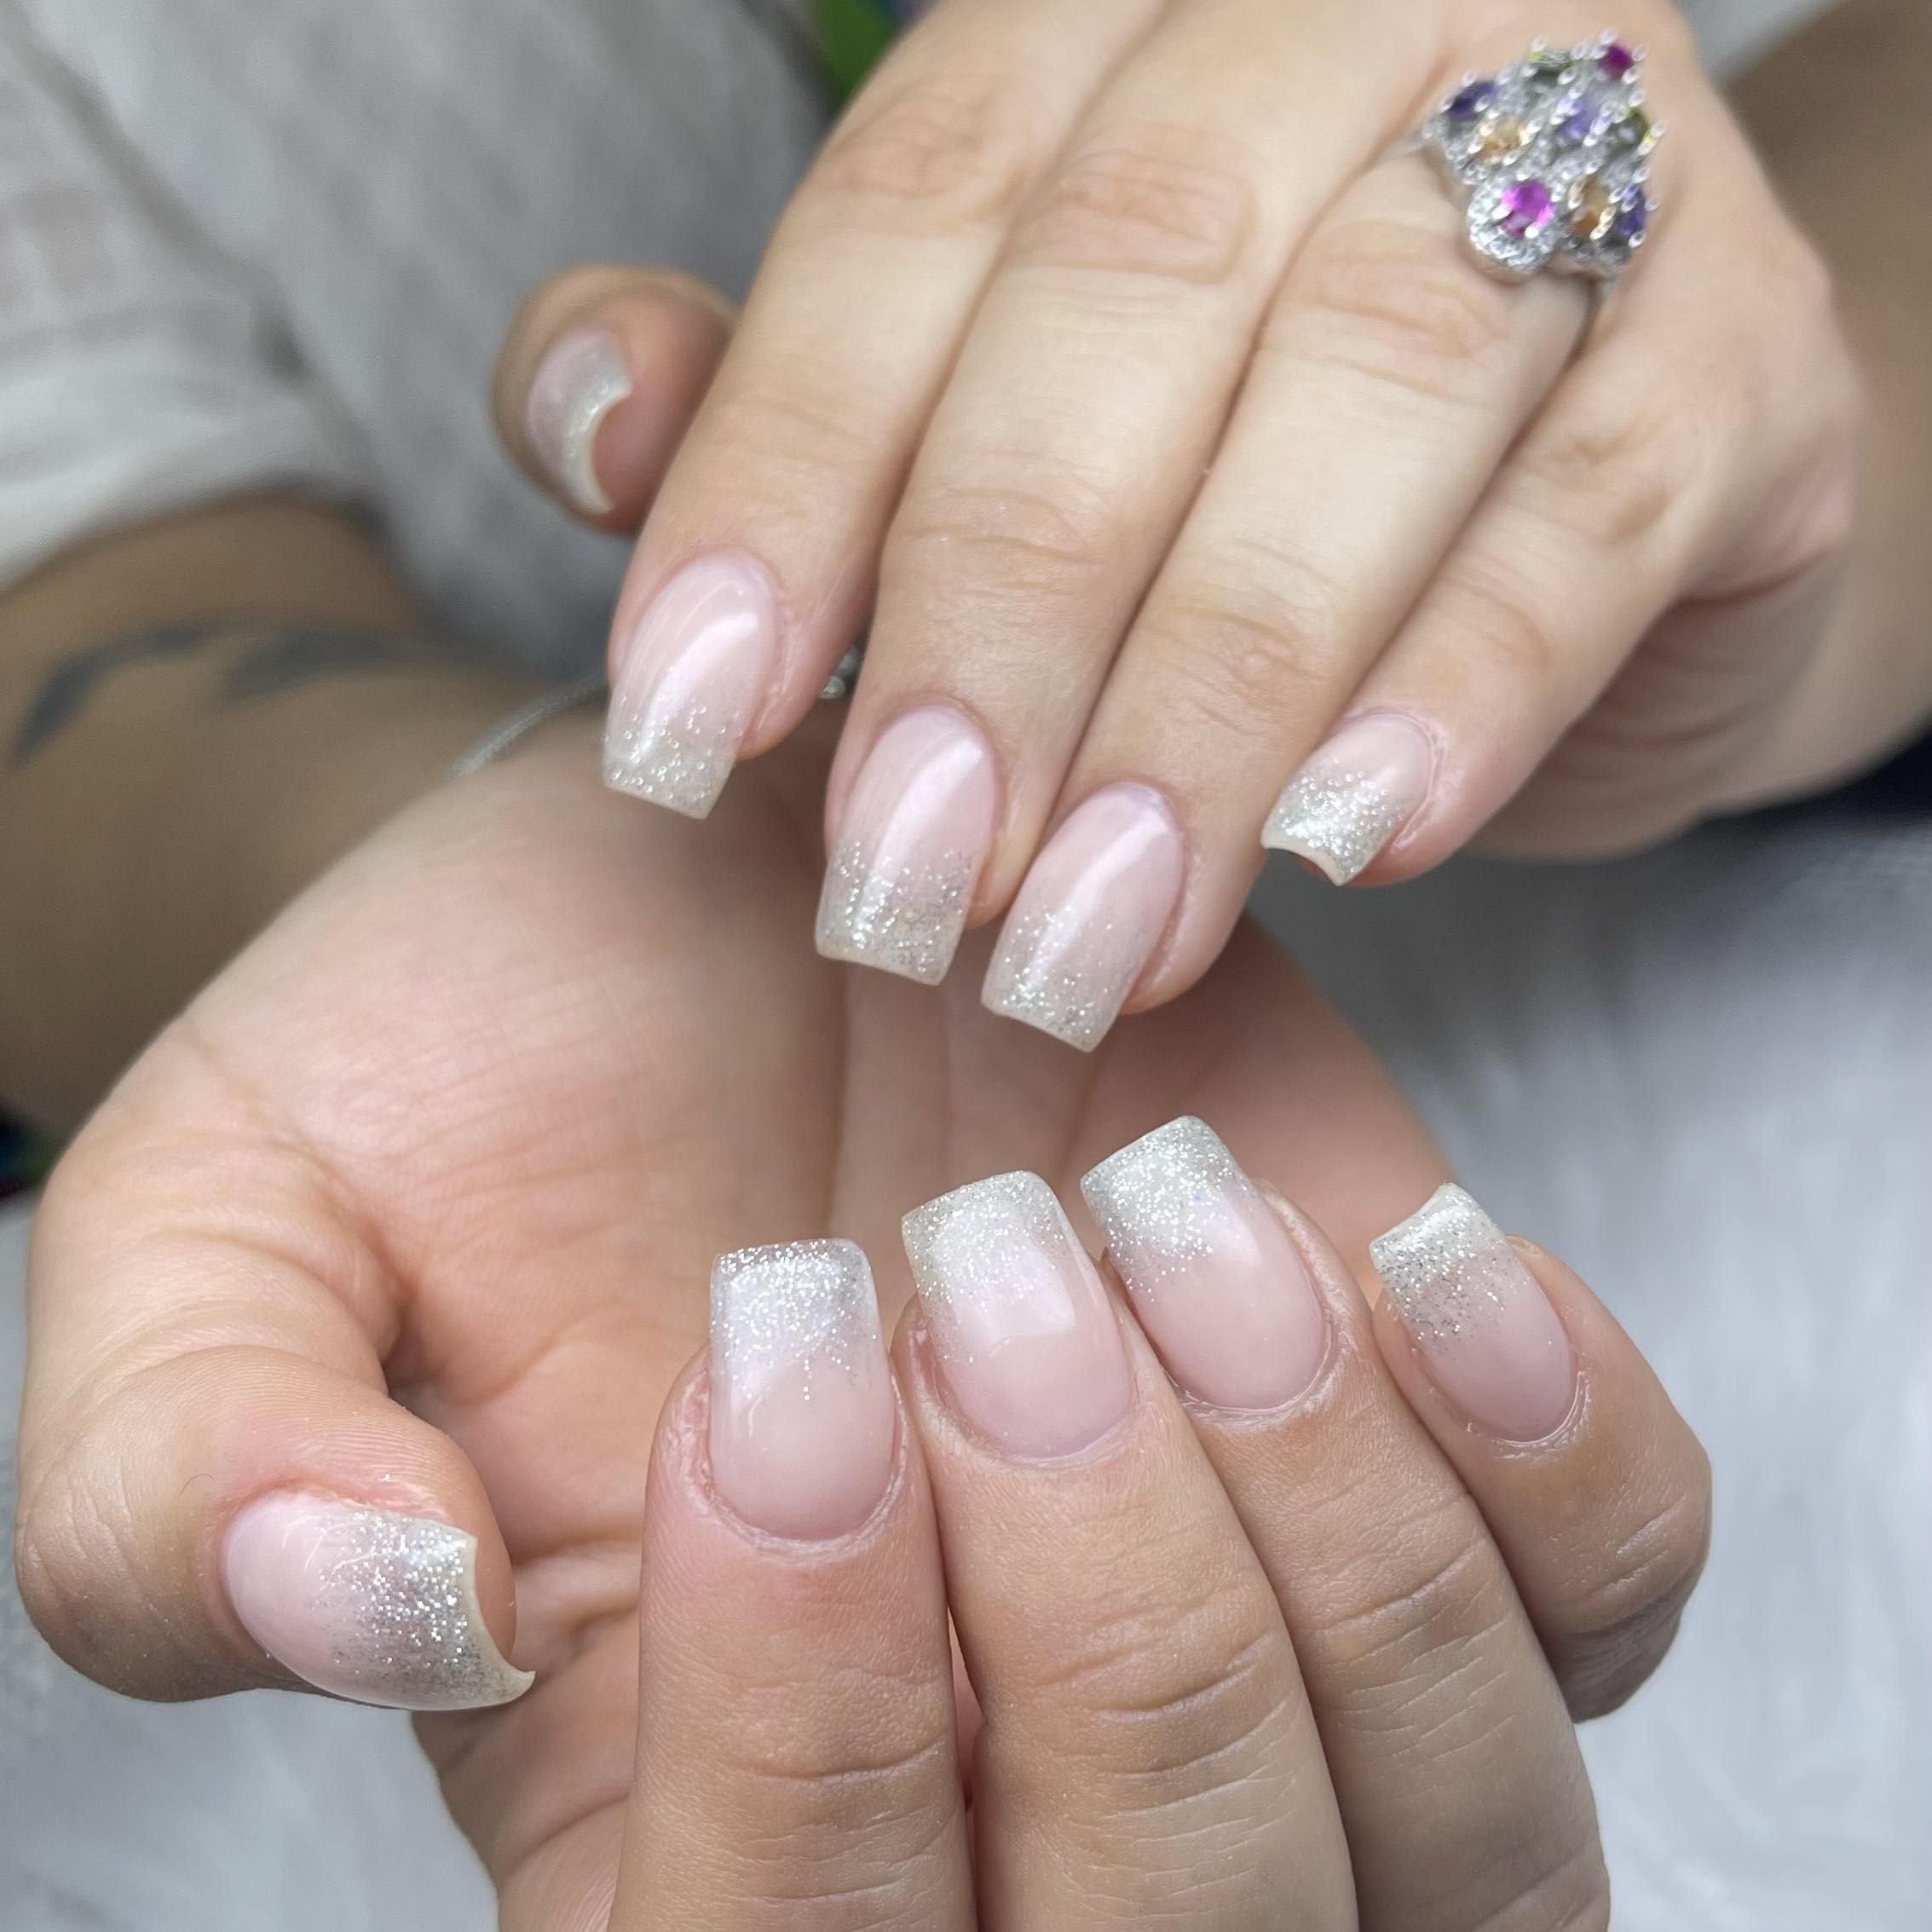 Poly gel on natural nail / design cost separate portfolio